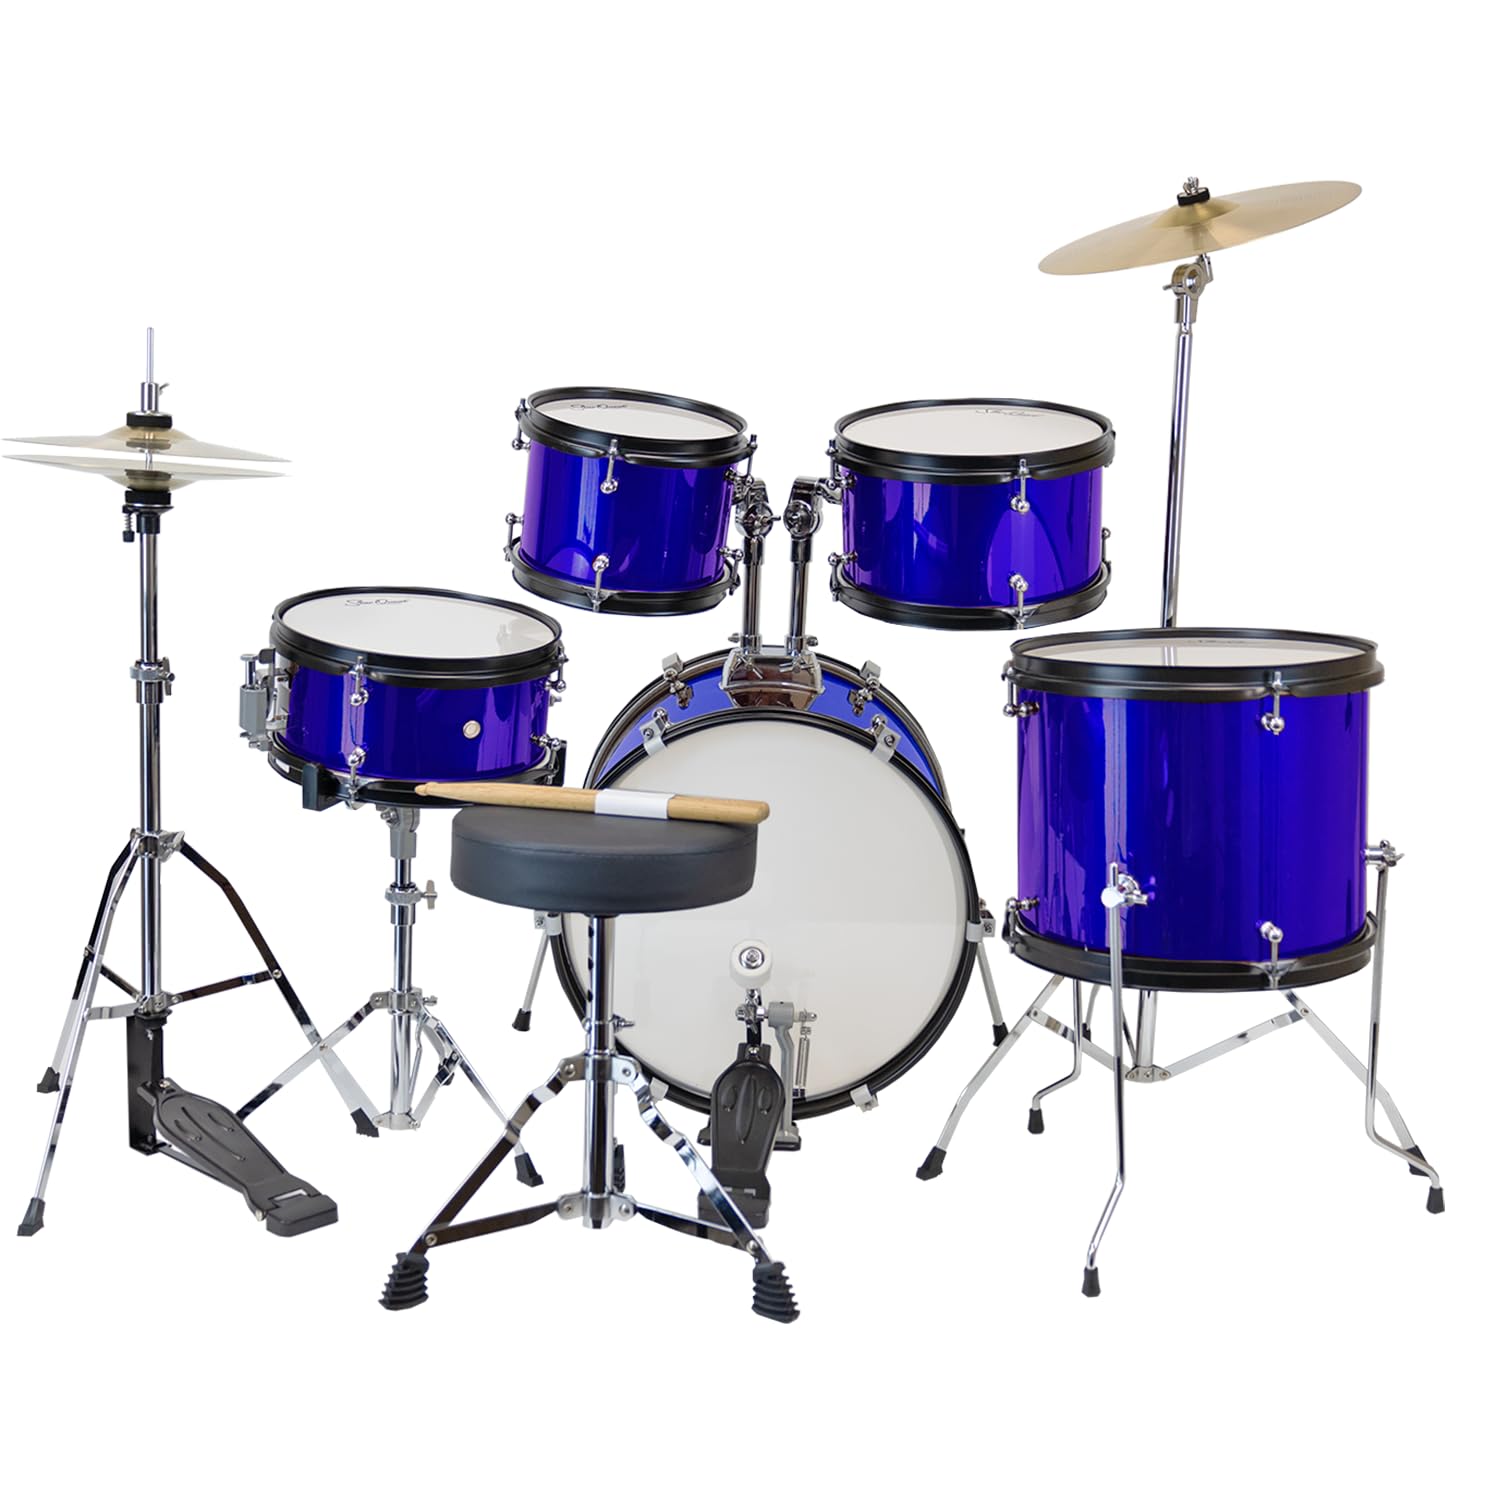 StarQuest SQ-DS-JR5-MBL Junior 5-Piece Drum Set – Premium Metallic Blue Finish – Perfect for Young Drummers and Beginners, High Quality